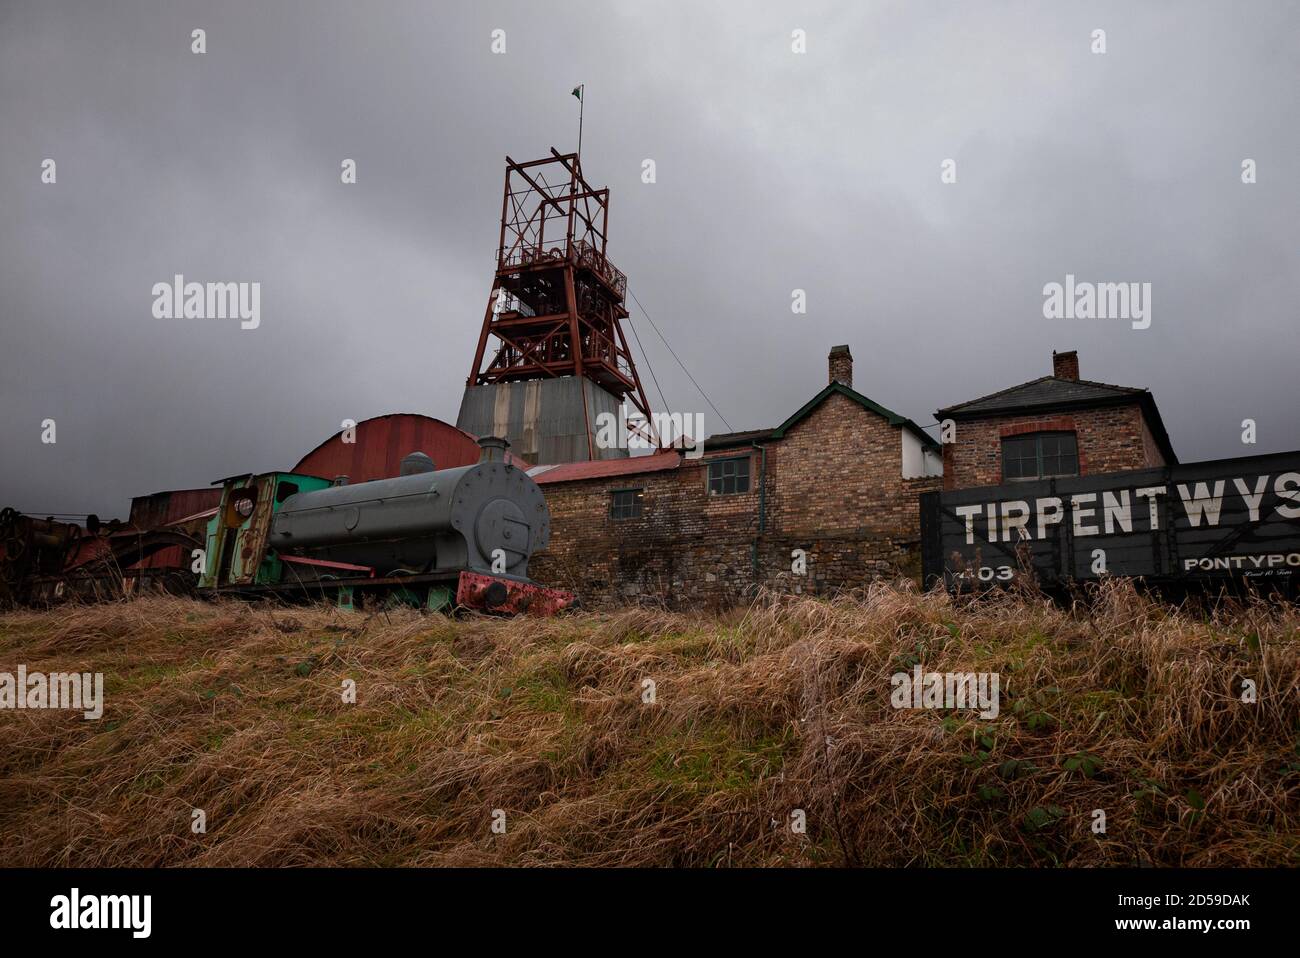 Winding gear at the Big Pit former coal mine at the UNESCO World Heritage Site, Blaenavon Industrial Landscape, South Wales, United Kingdom Stock Photo